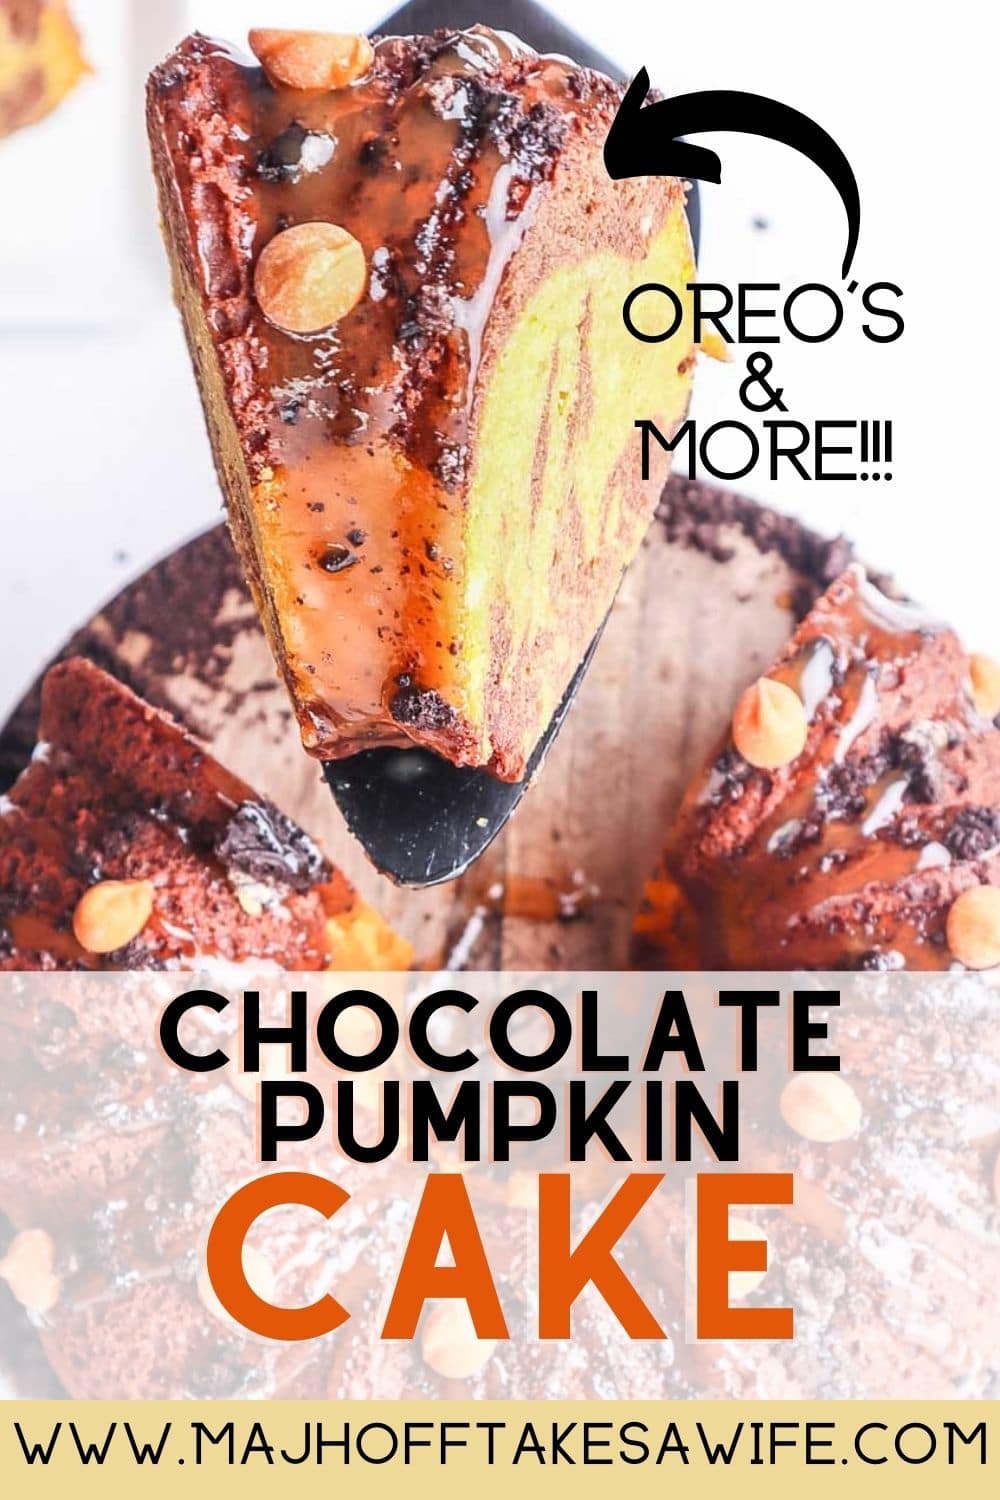  Love pumpkin and chocolate? This easy chocolate pumpkin bundt cake will make you swoon. Using a cake mix will save you time, and cooking in an Instant pot ensures it is moist and never dried out like some bundt cakes.
     This marble cake features a chocolate cake batter with butterscotch morsels swirled with a pumpkin puree batter that is loaded with Oreos and pumpkin pie spice. All that and it still uses just one basic yellow box cake mix. 
 via @mrsmajorhoff